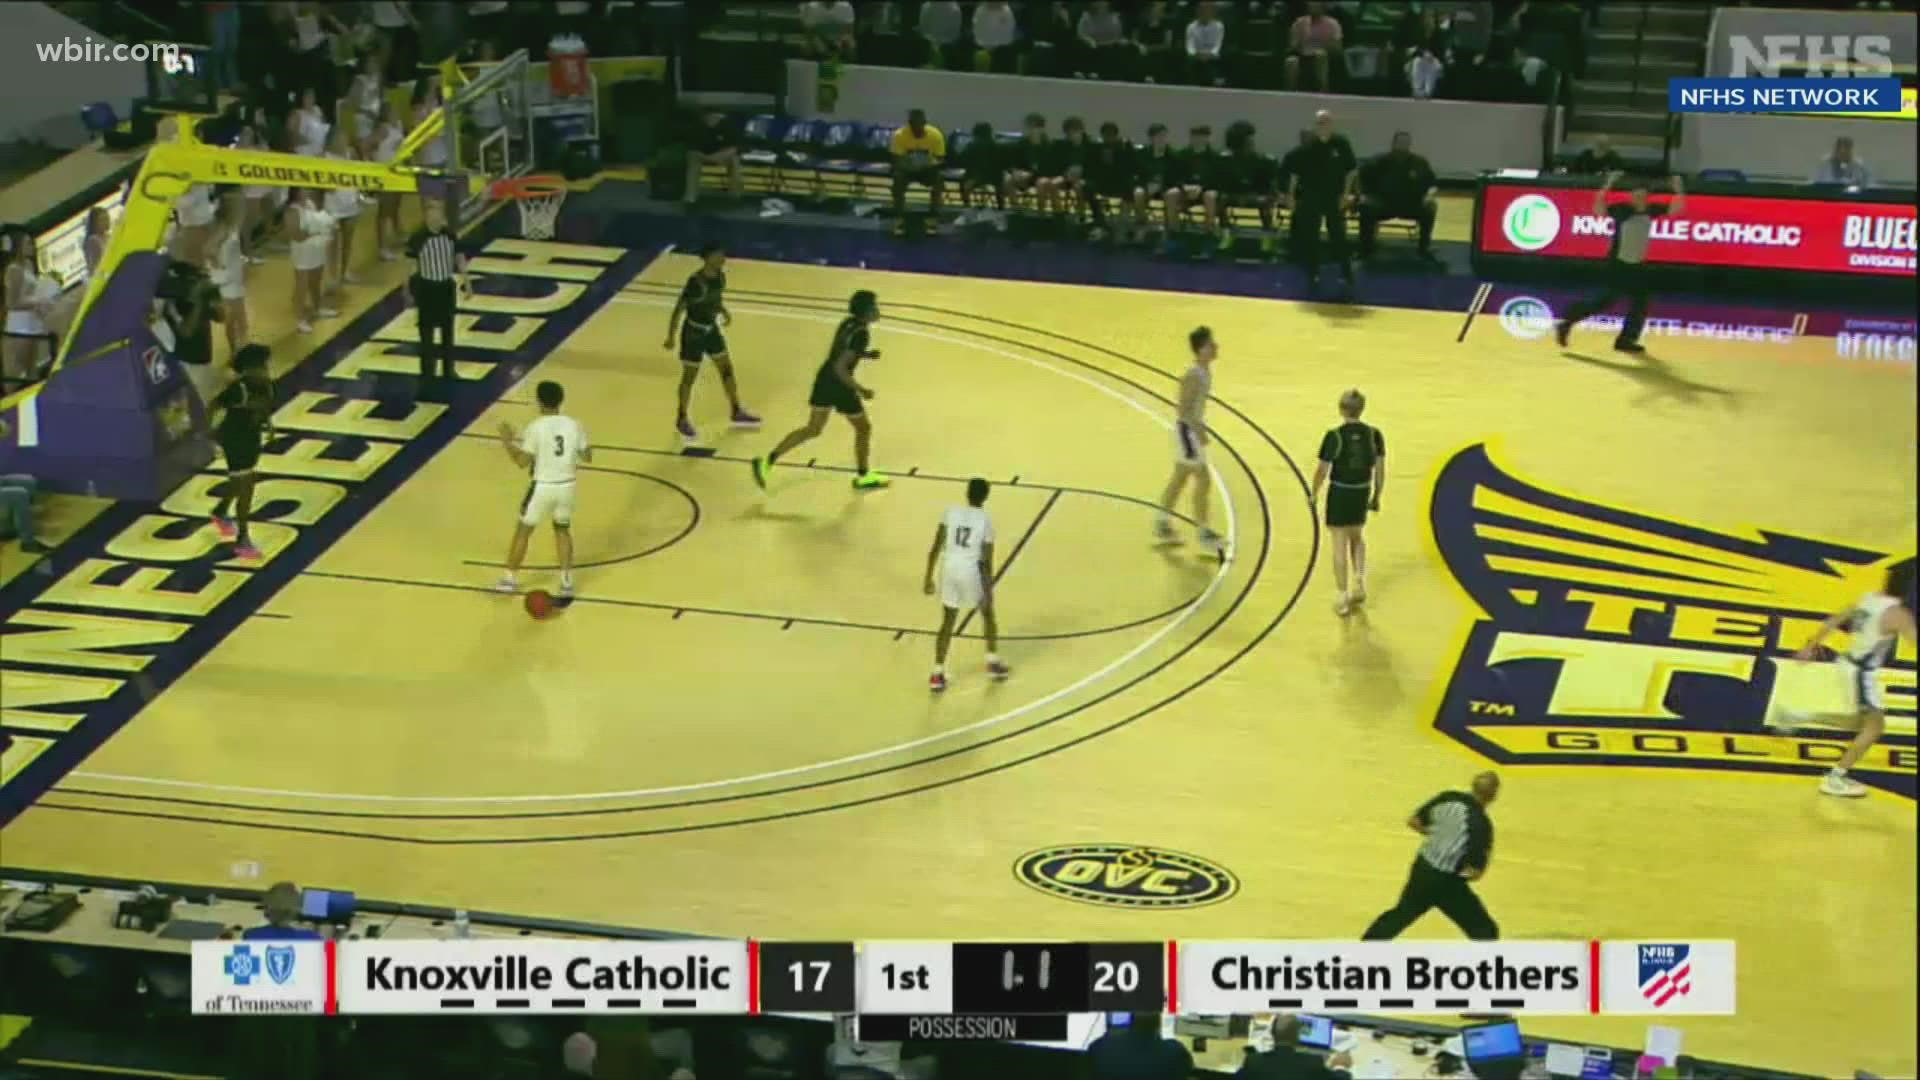 The Fighting Irish almost overcame a 13-point deficit, but could not overcome the high-powered Christian Brothers' offense.